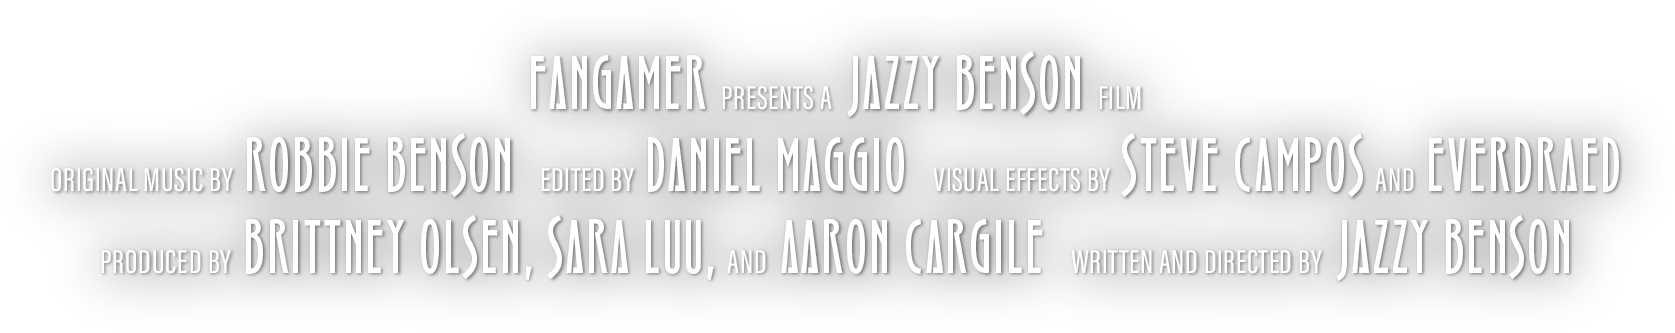 Fangamer presents a Jazzy Benson film, Original Music by Robbie Benson, Edited by Daniel Maggio, Visual Effects by Steven Campos and Everdraed, Produced by Brittney Olsen, Sara Luu, and Aaron Cargile, Written and Directed by Jazzy Benson